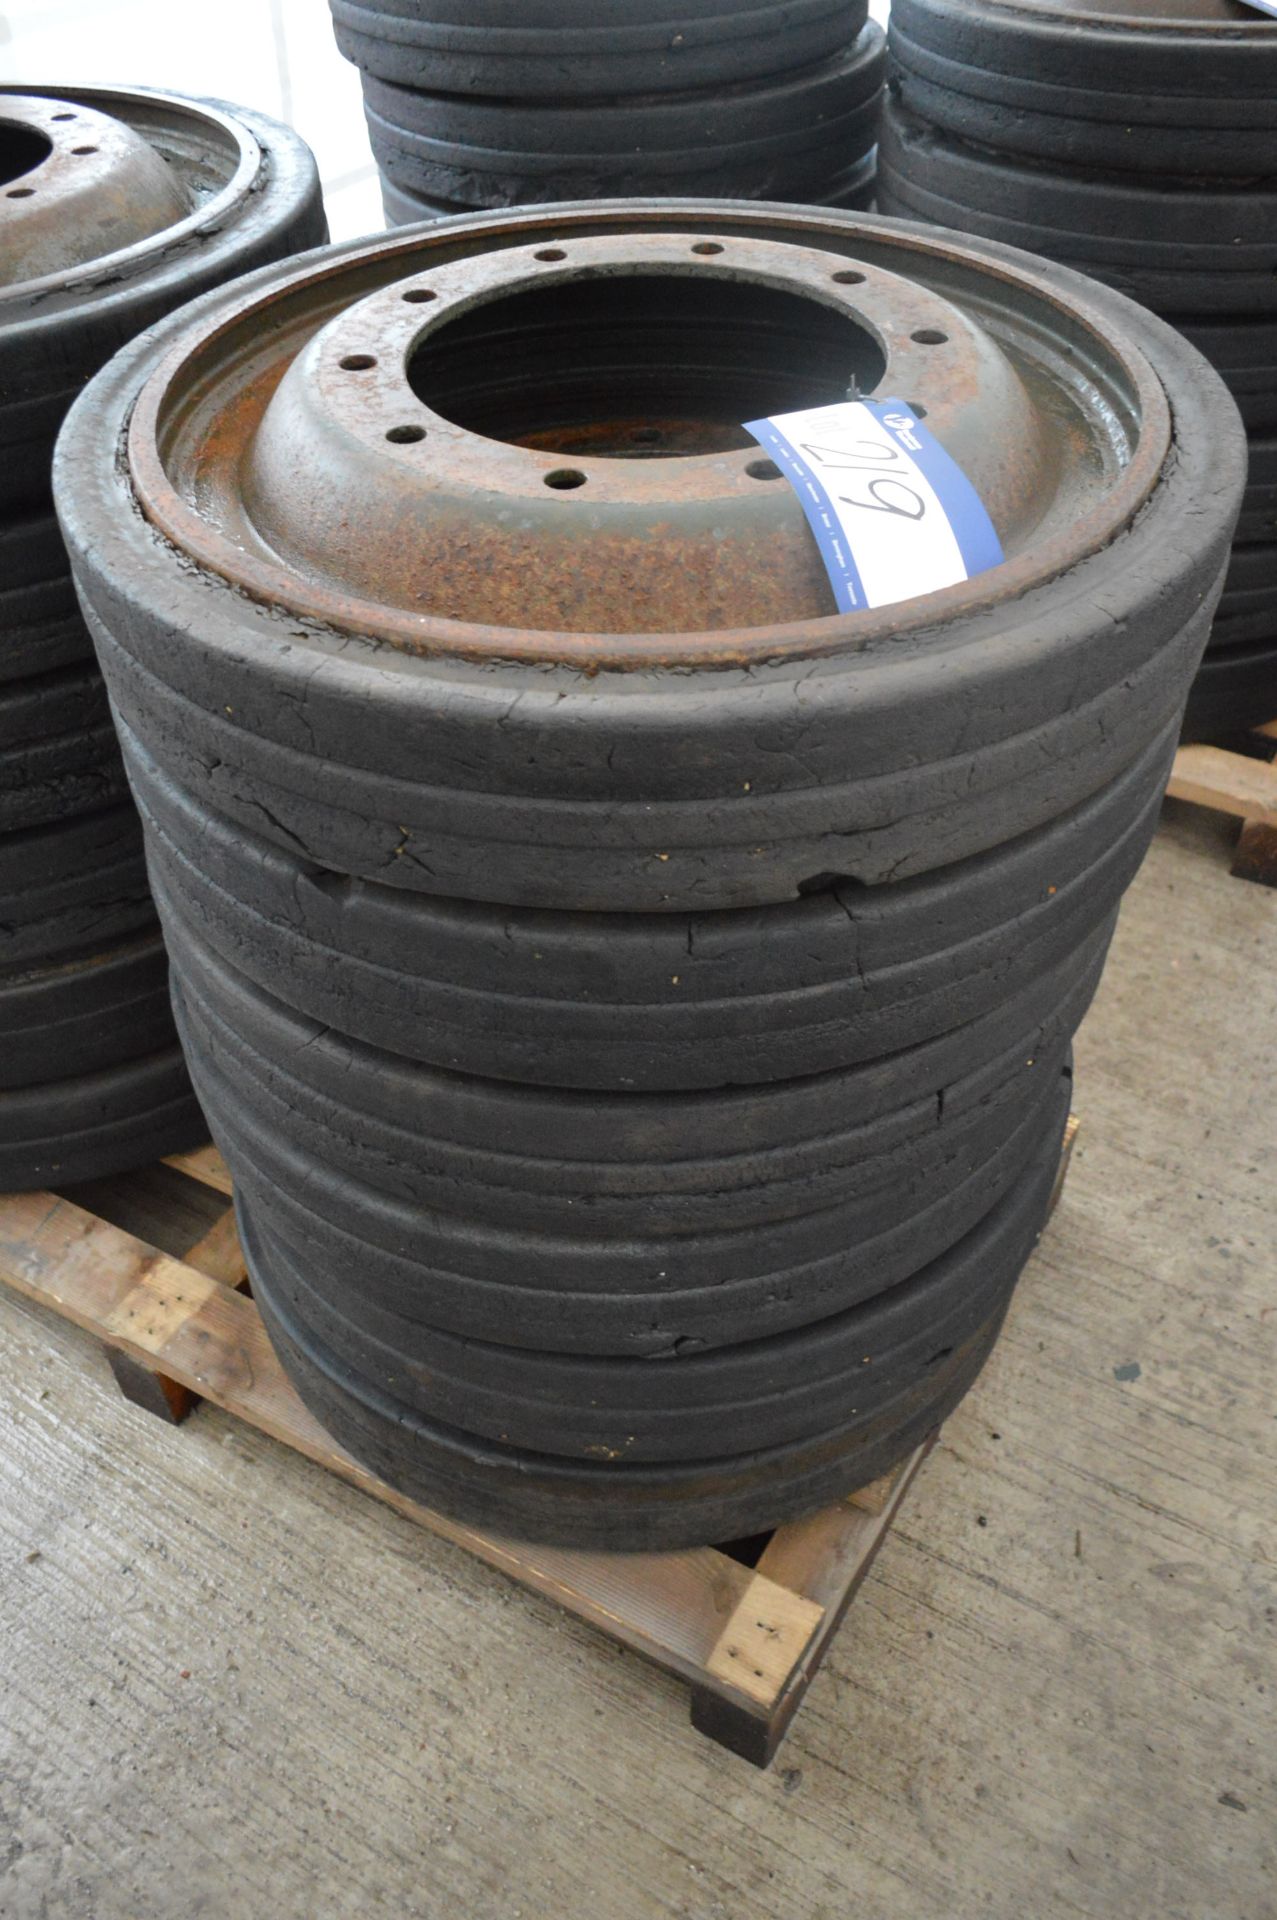 Six Road Wheels, understood to be suitable for Cen